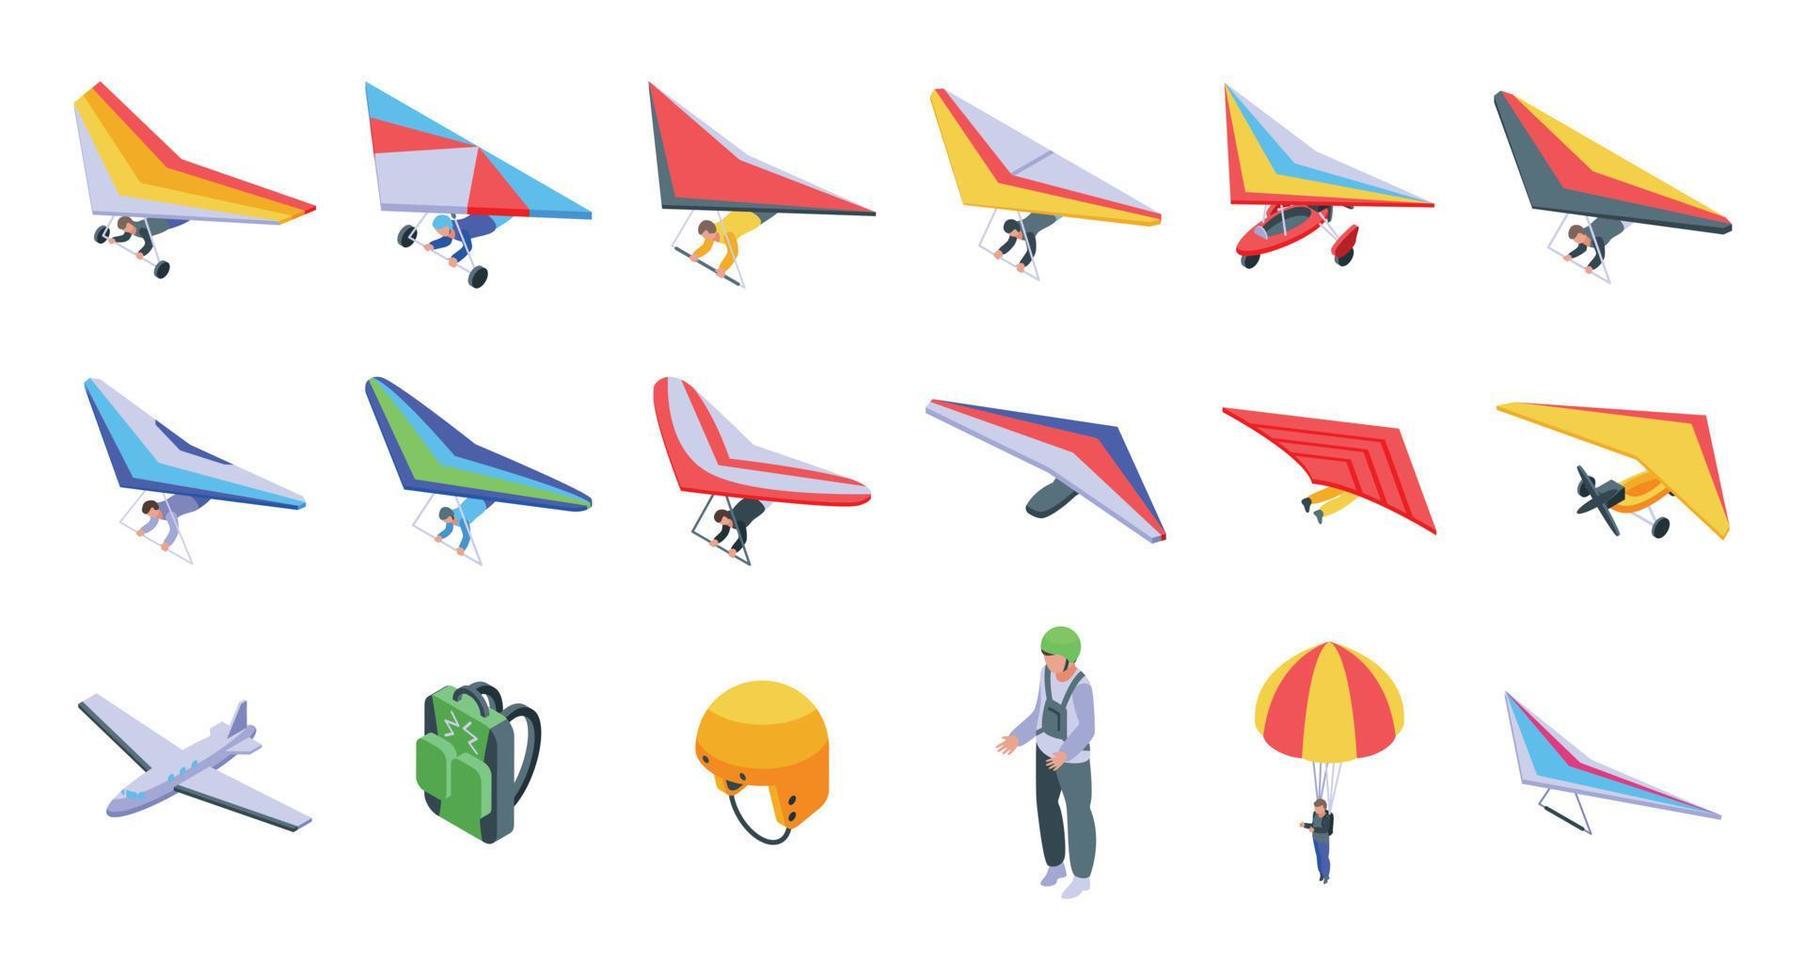 Hang glider icons set, isometric style vector